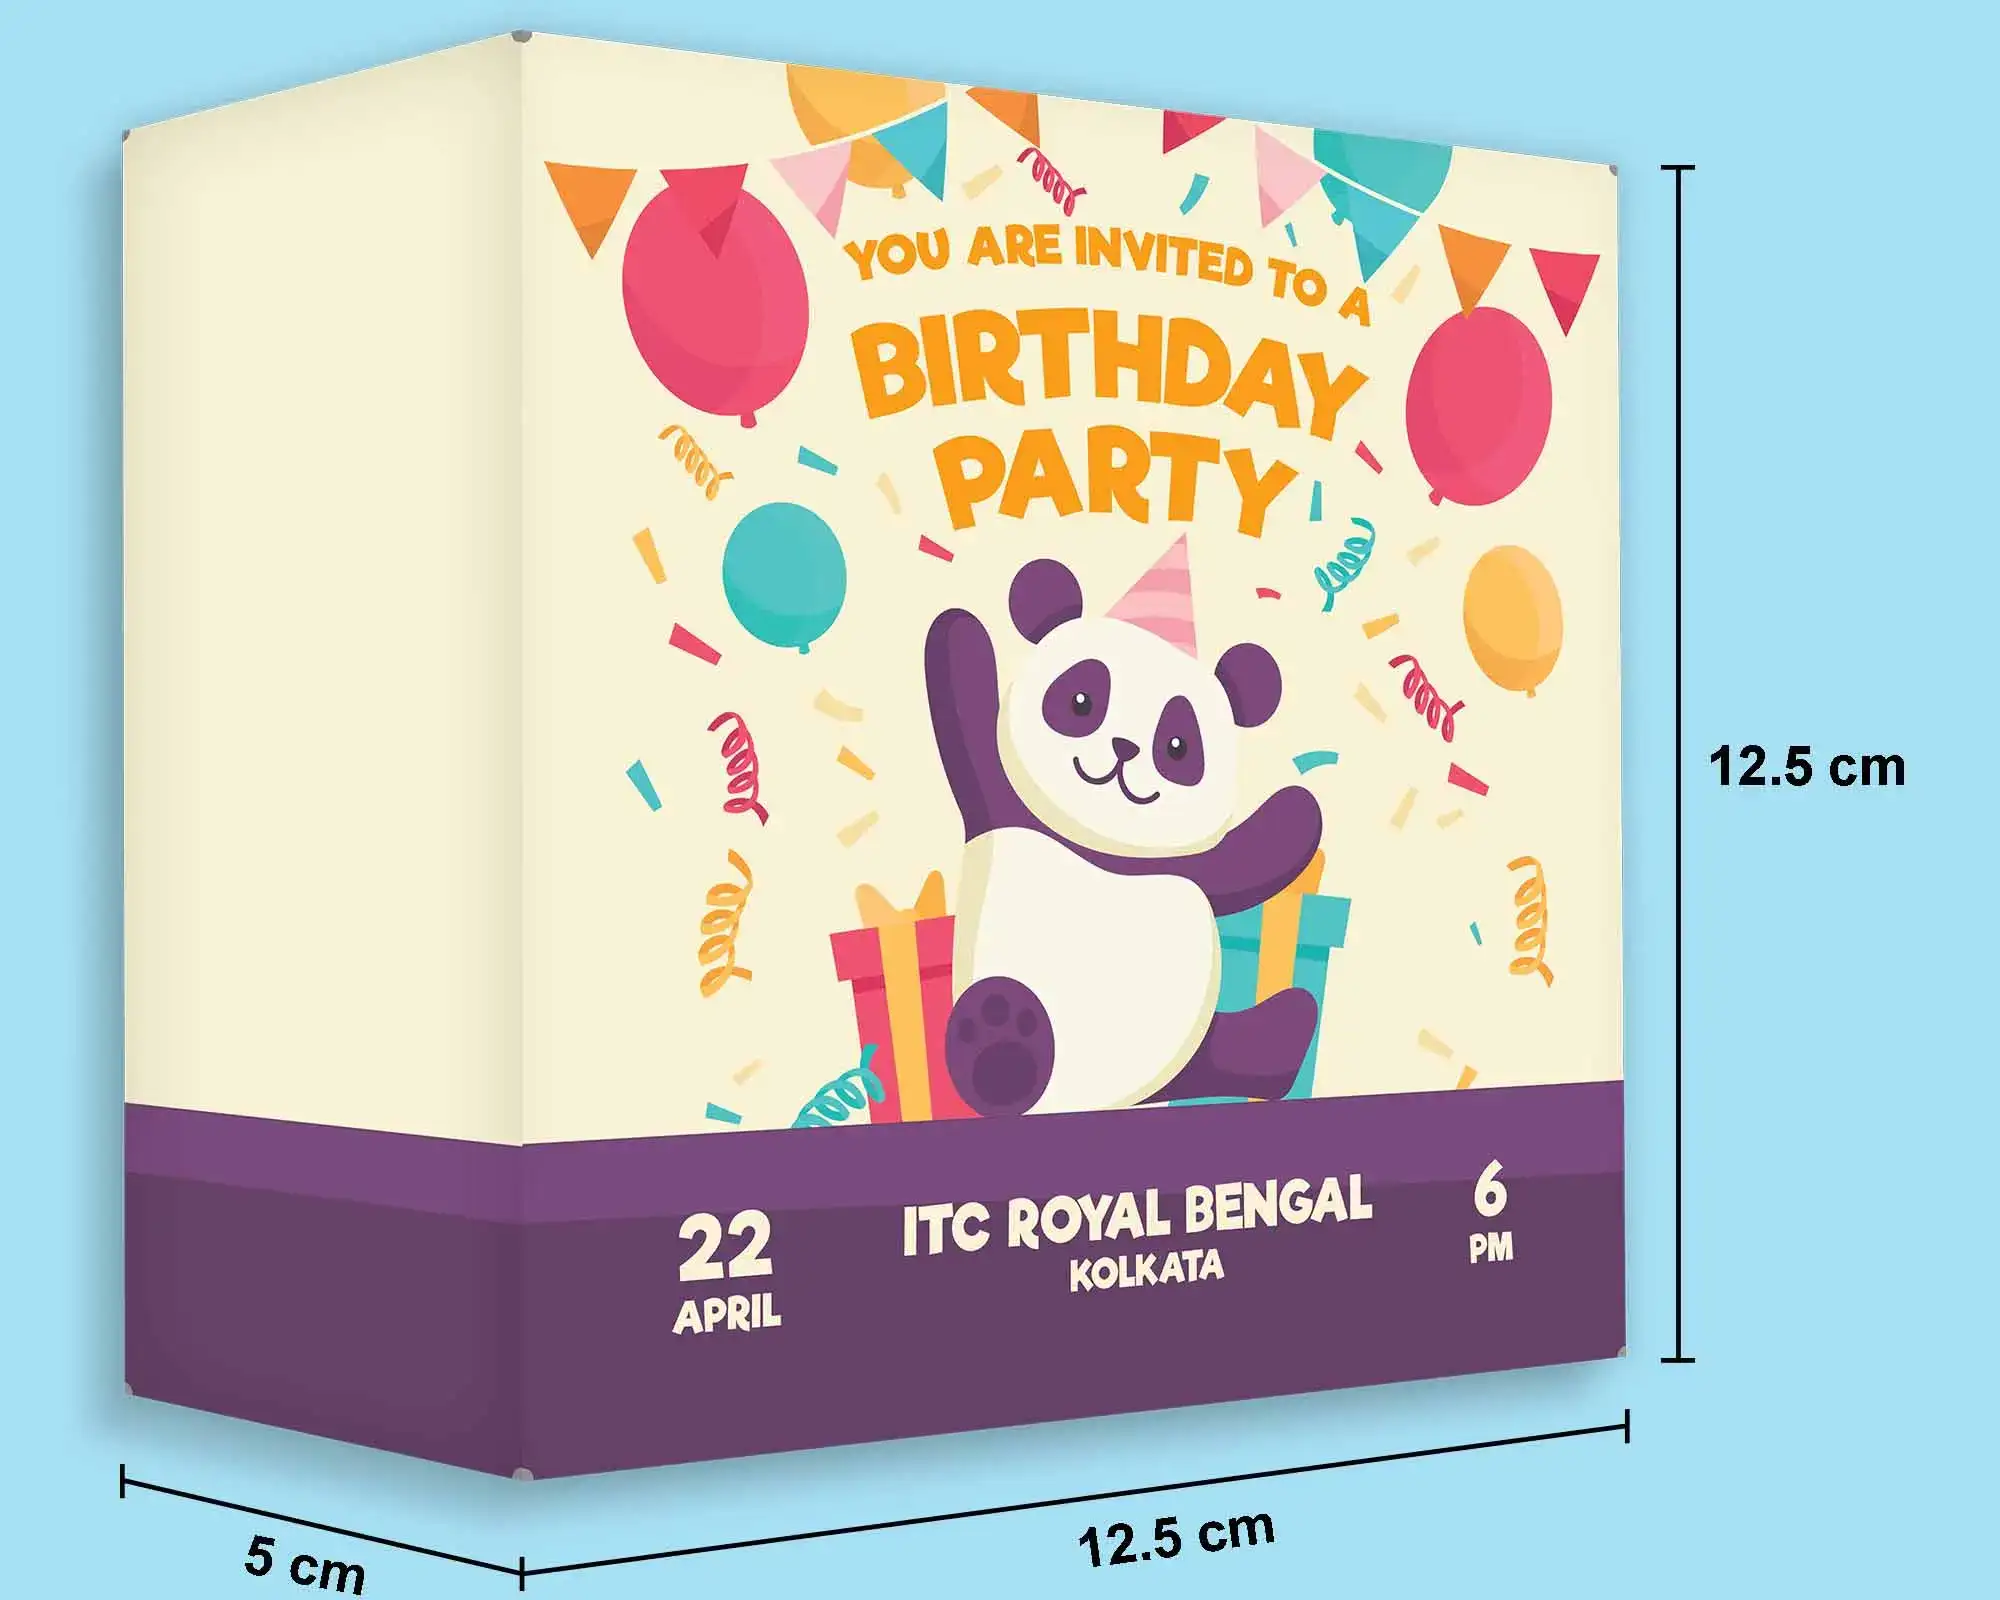 Customized Birthday Invitation Gifts under Rs 100